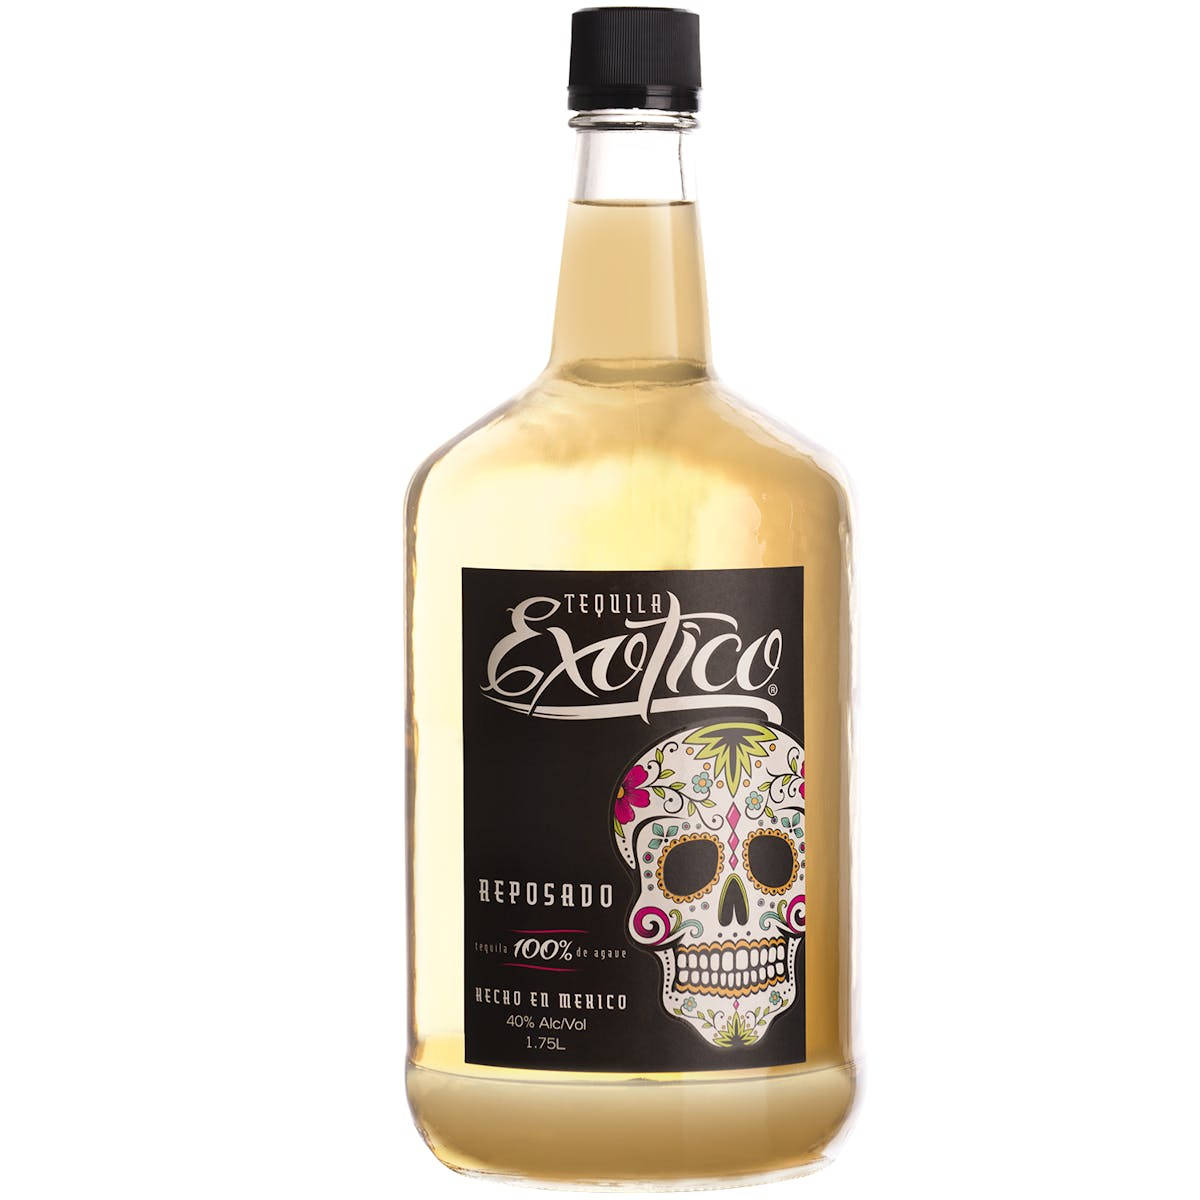 Caption: Exquisite Exotico Tequila Reposado in Thick Bottle Wallpaper